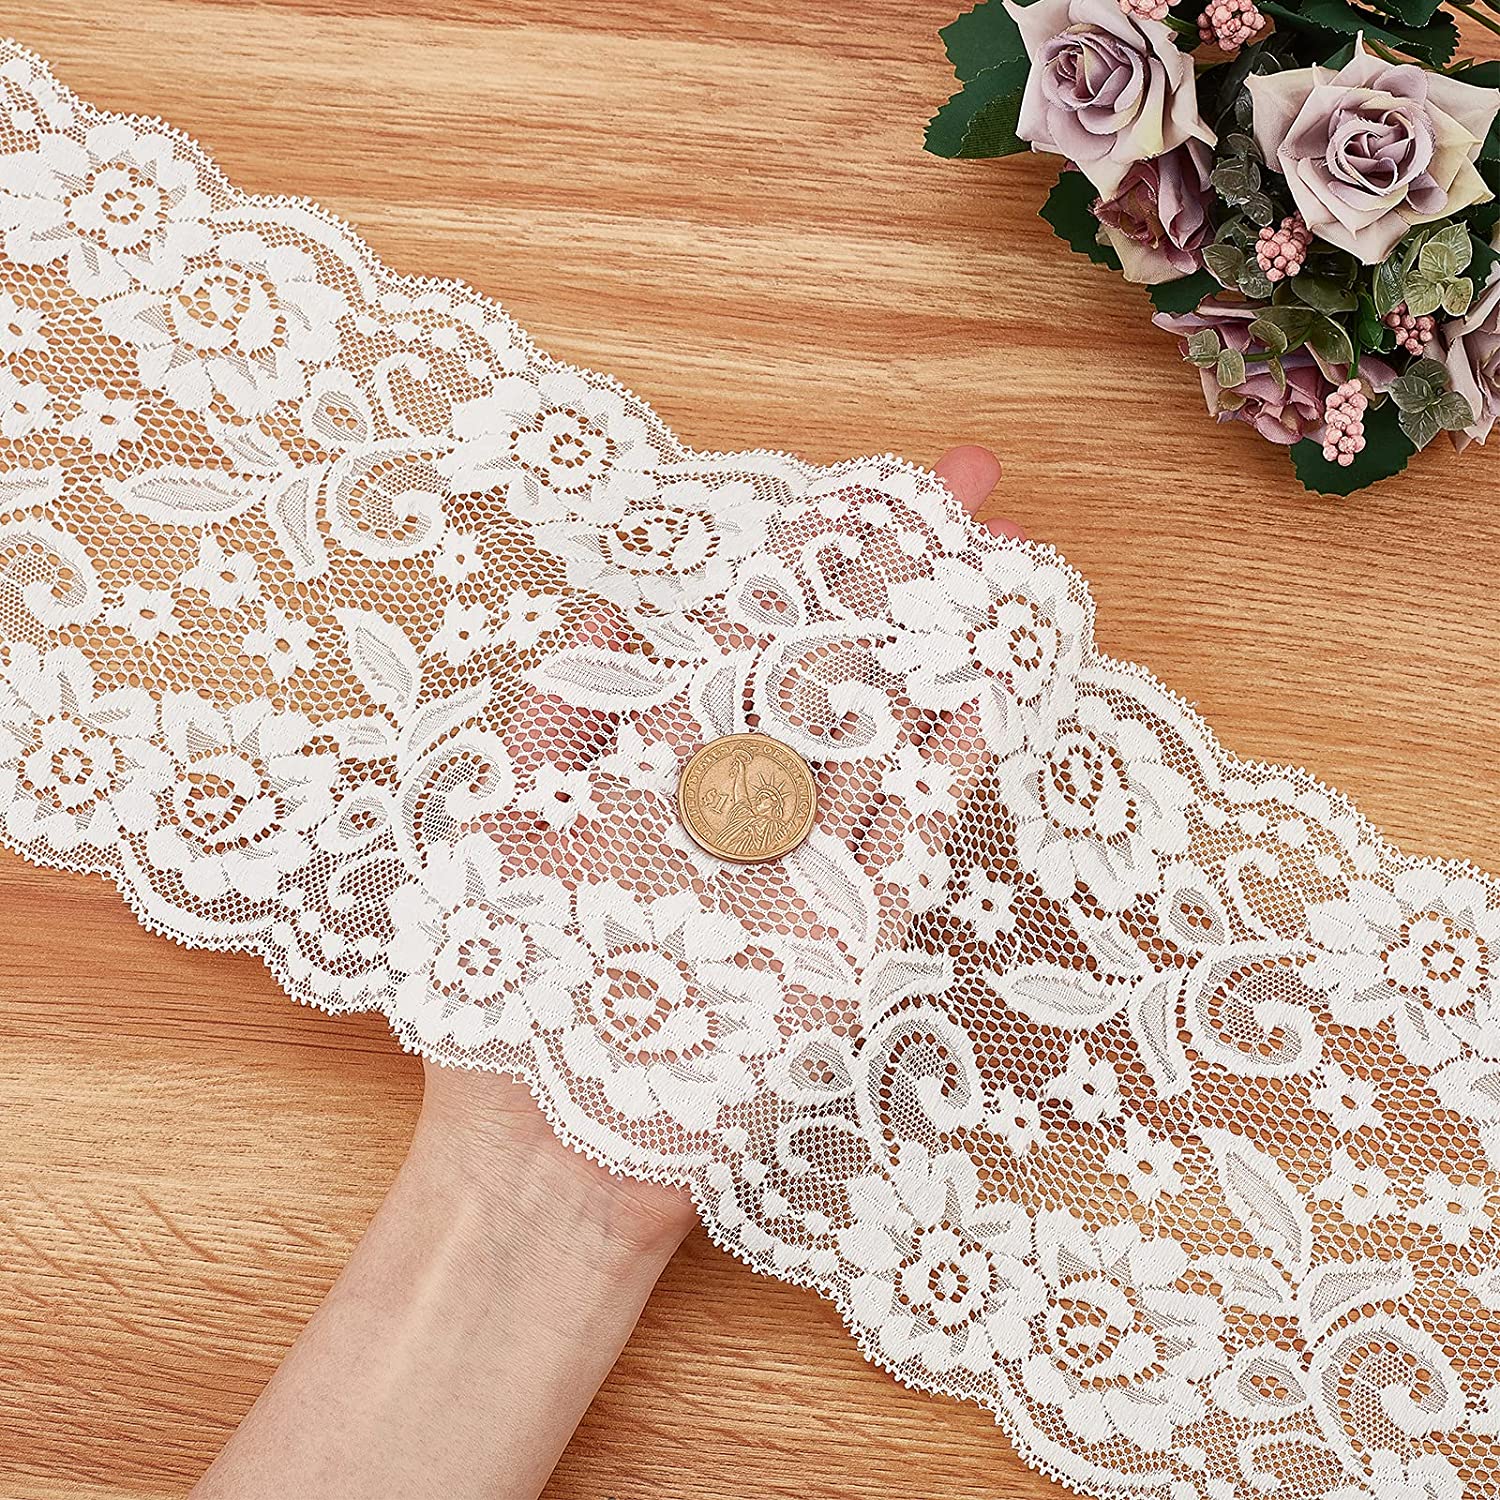  2 Yard 6Inch Lace Ribbon for Sewing-Lace Ribbons for